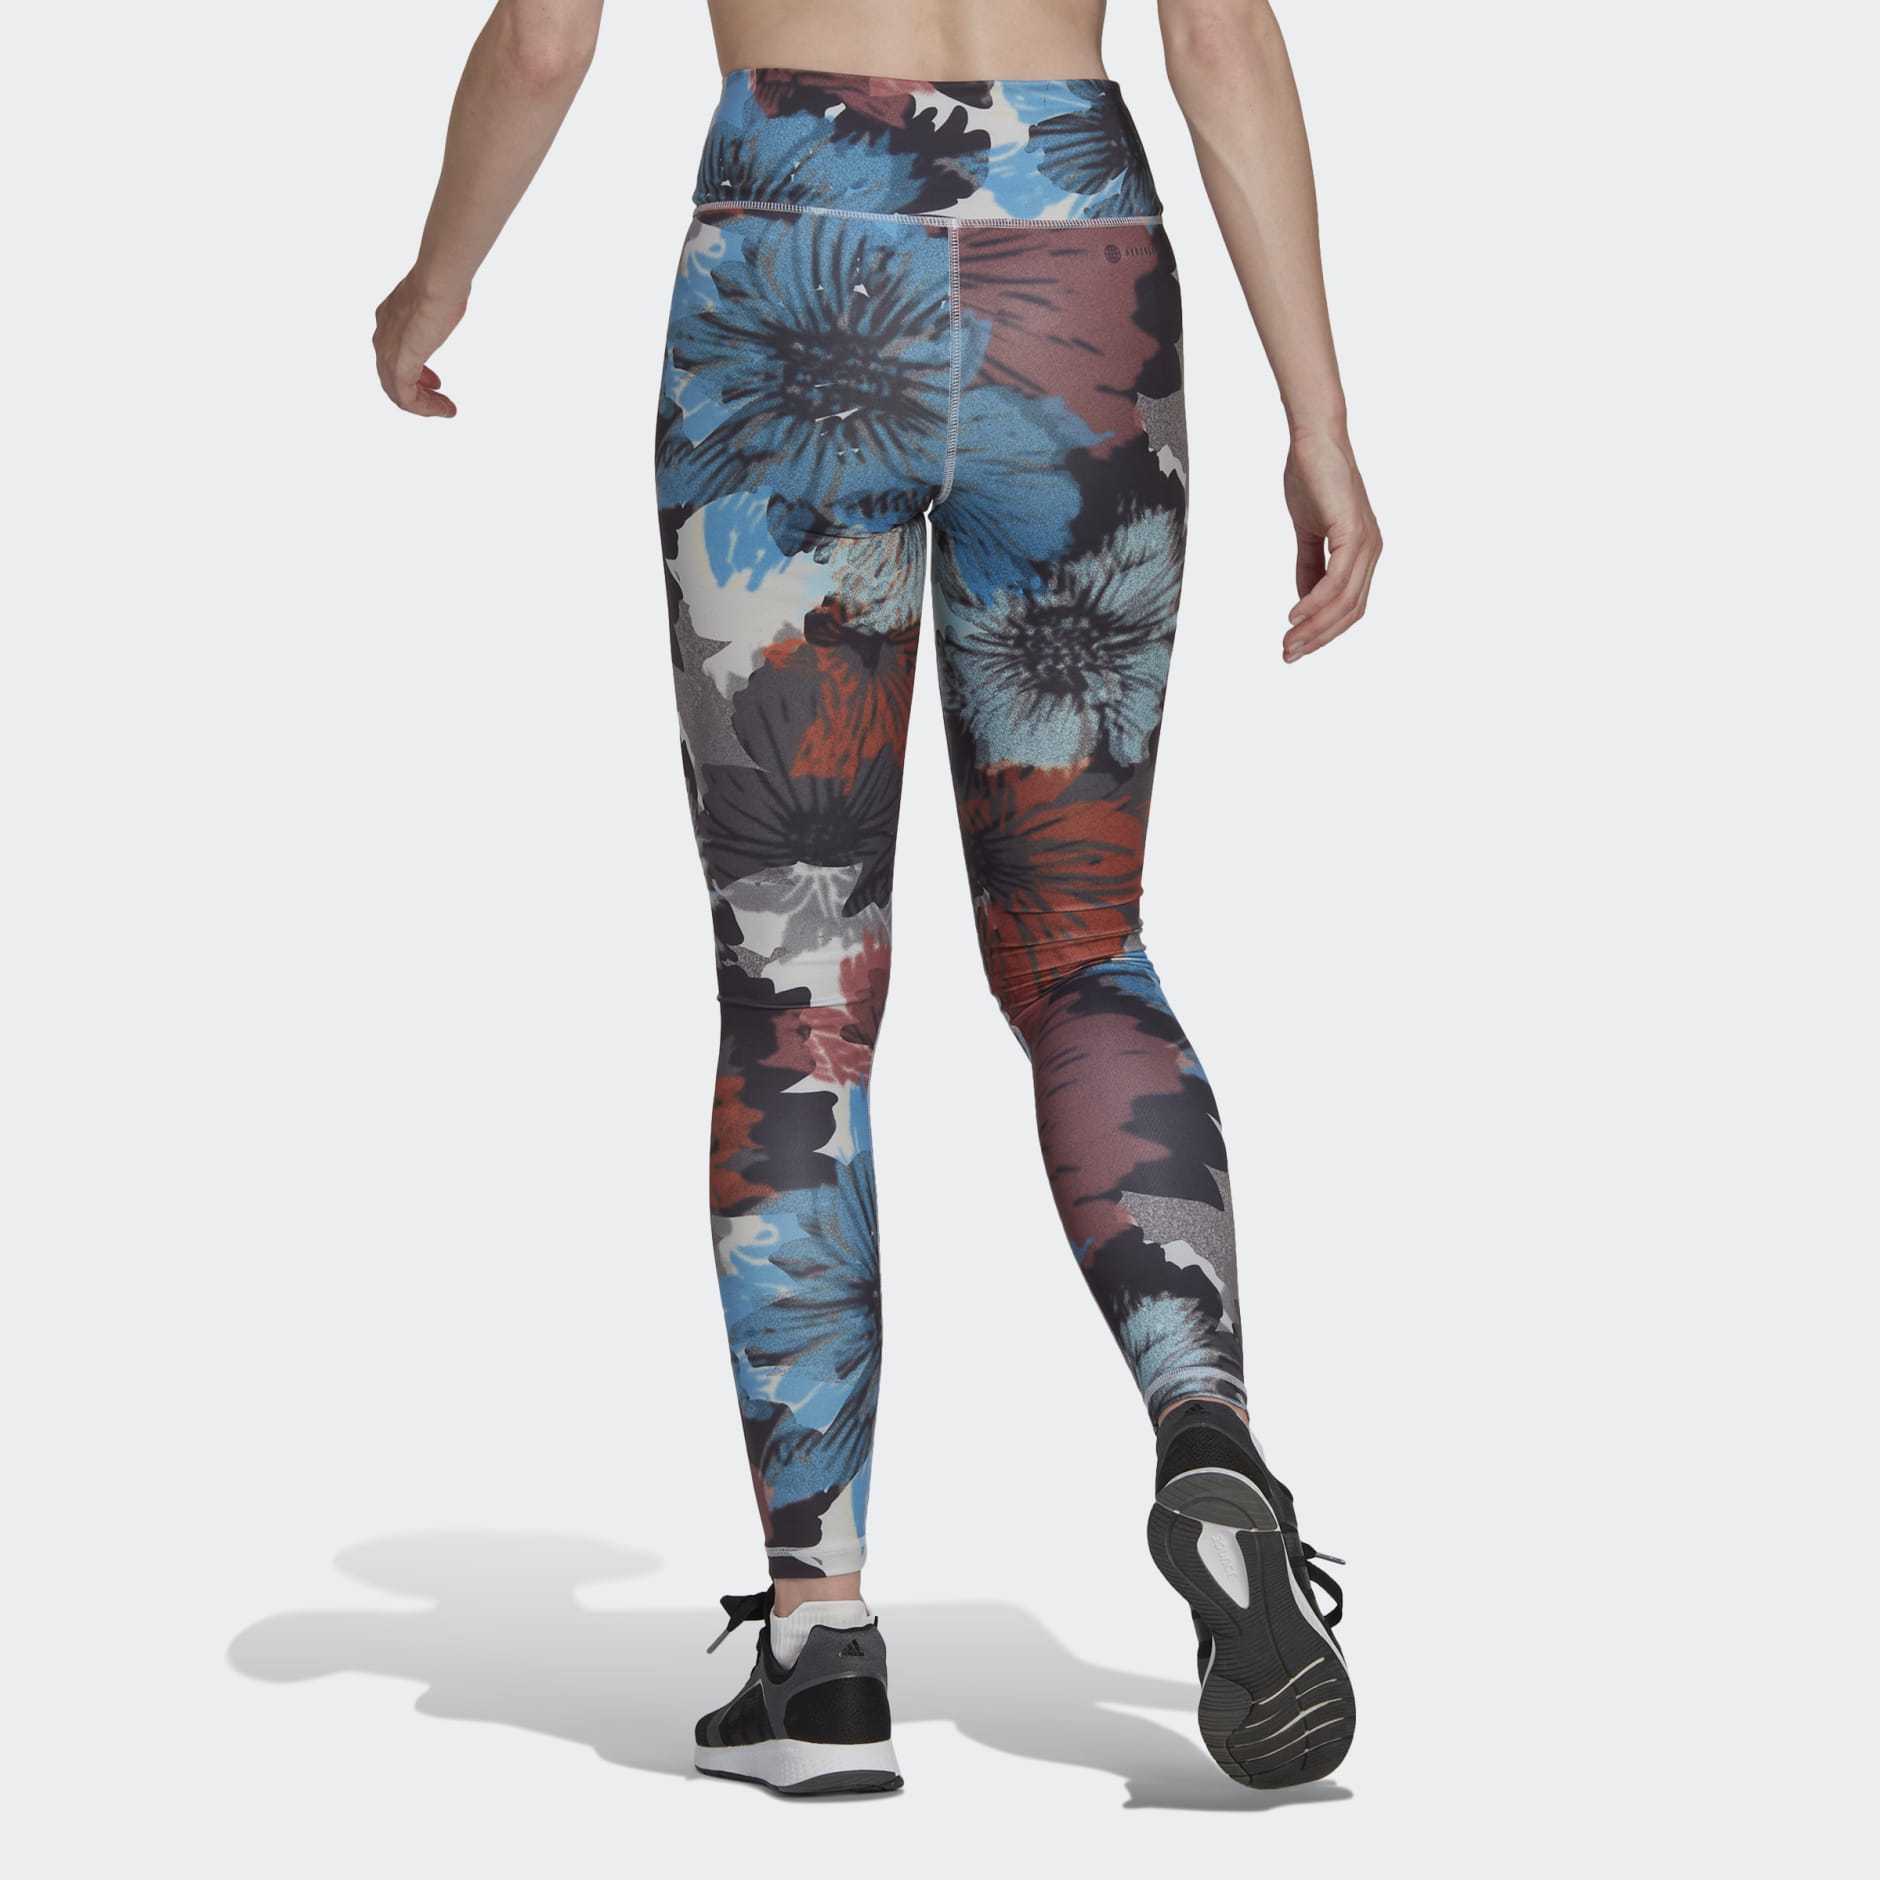 Women's Clothing - Essentials Printed High-Waisted Leggings - Grey Kuwait